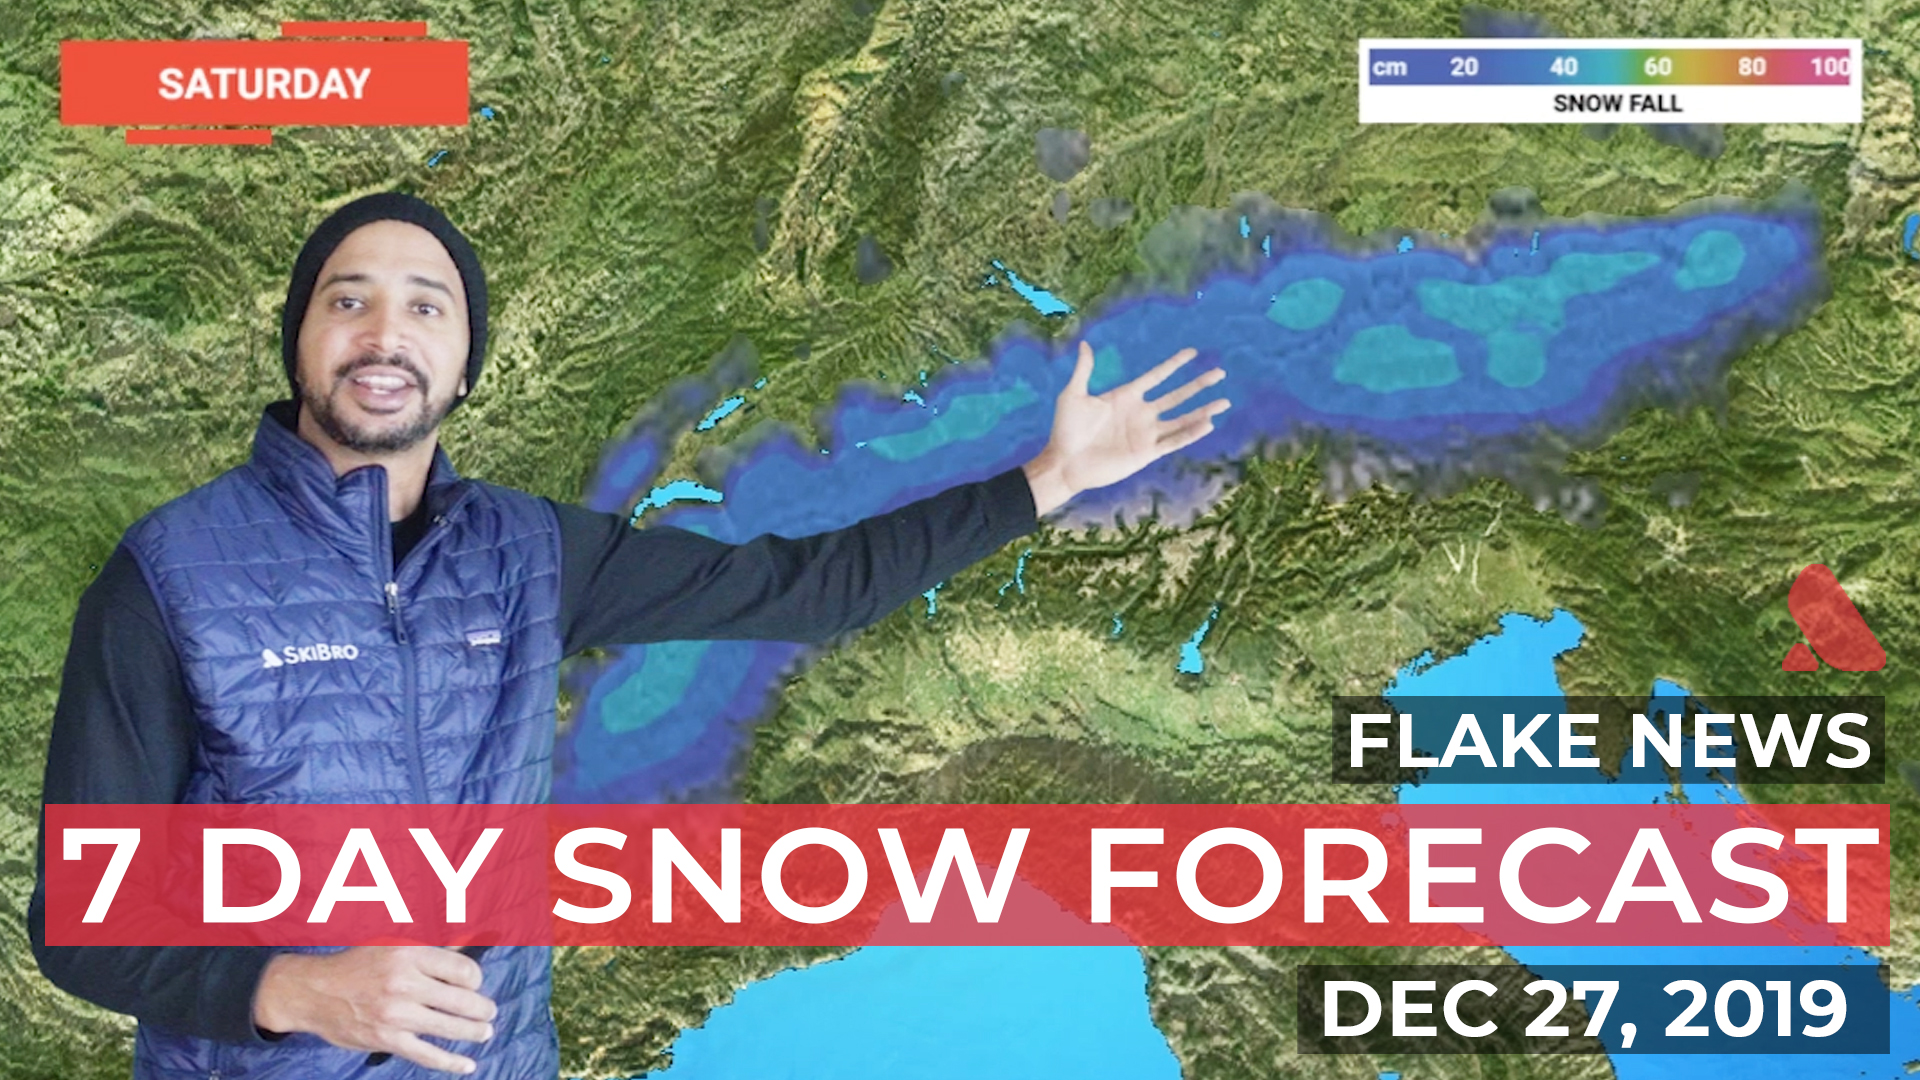 Snow forecast weatherman in front of map of the Alps